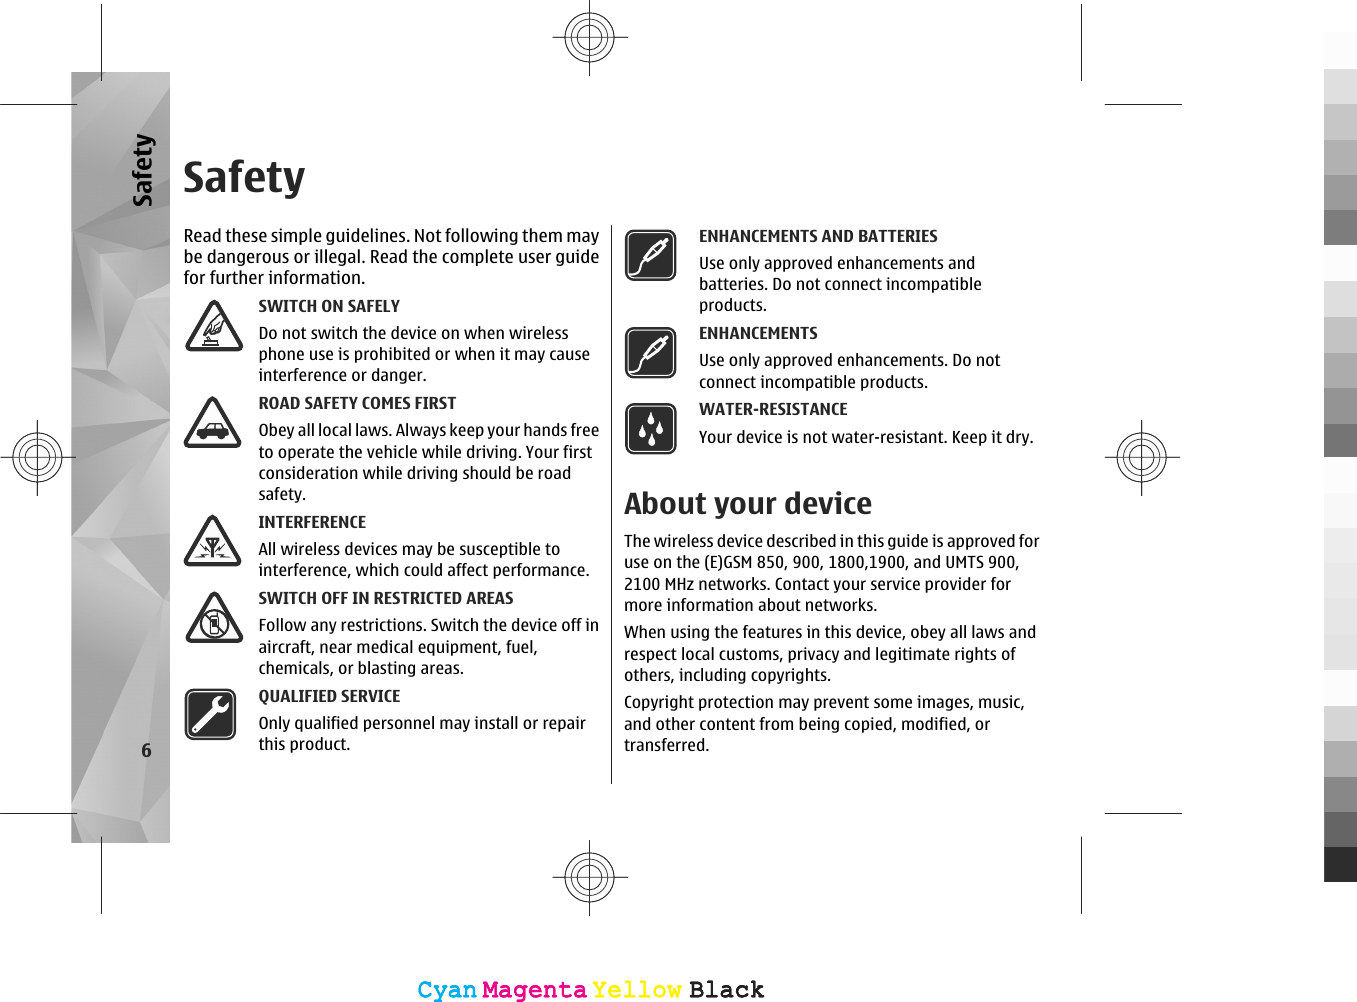 SafetyRead these simple guidelines. Not following them maybe dangerous or illegal. Read the complete user guidefor further information.SWITCH ON SAFELYDo not switch the device on when wirelessphone use is prohibited or when it may causeinterference or danger.ROAD SAFETY COMES FIRSTObey all local laws. Always keep your hands freeto operate the vehicle while driving. Your firstconsideration while driving should be roadsafety.INTERFERENCEAll wireless devices may be susceptible tointerference, which could affect performance.SWITCH OFF IN RESTRICTED AREASFollow any restrictions. Switch the device off inaircraft, near medical equipment, fuel,chemicals, or blasting areas.QUALIFIED SERVICEOnly qualified personnel may install or repairthis product.ENHANCEMENTS AND BATTERIESUse only approved enhancements andbatteries. Do not connect incompatibleproducts.ENHANCEMENTSUse only approved enhancements. Do notconnect incompatible products.WATER-RESISTANCEYour device is not water-resistant. Keep it dry.About your deviceThe wireless device described in this guide is approved foruse on the (E)GSM 850, 900, 1800,1900, and UMTS 900,2100 MHz networks. Contact your service provider formore information about networks.When using the features in this device, obey all laws andrespect local customs, privacy and legitimate rights ofothers, including copyrights.Copyright protection may prevent some images, music,and other content from being copied, modified, ortransferred.6SafetyCyanCyanMagentaMagentaYellowYellowBlackBlackCyanCyanMagentaMagentaYellowYellowBlackBlack